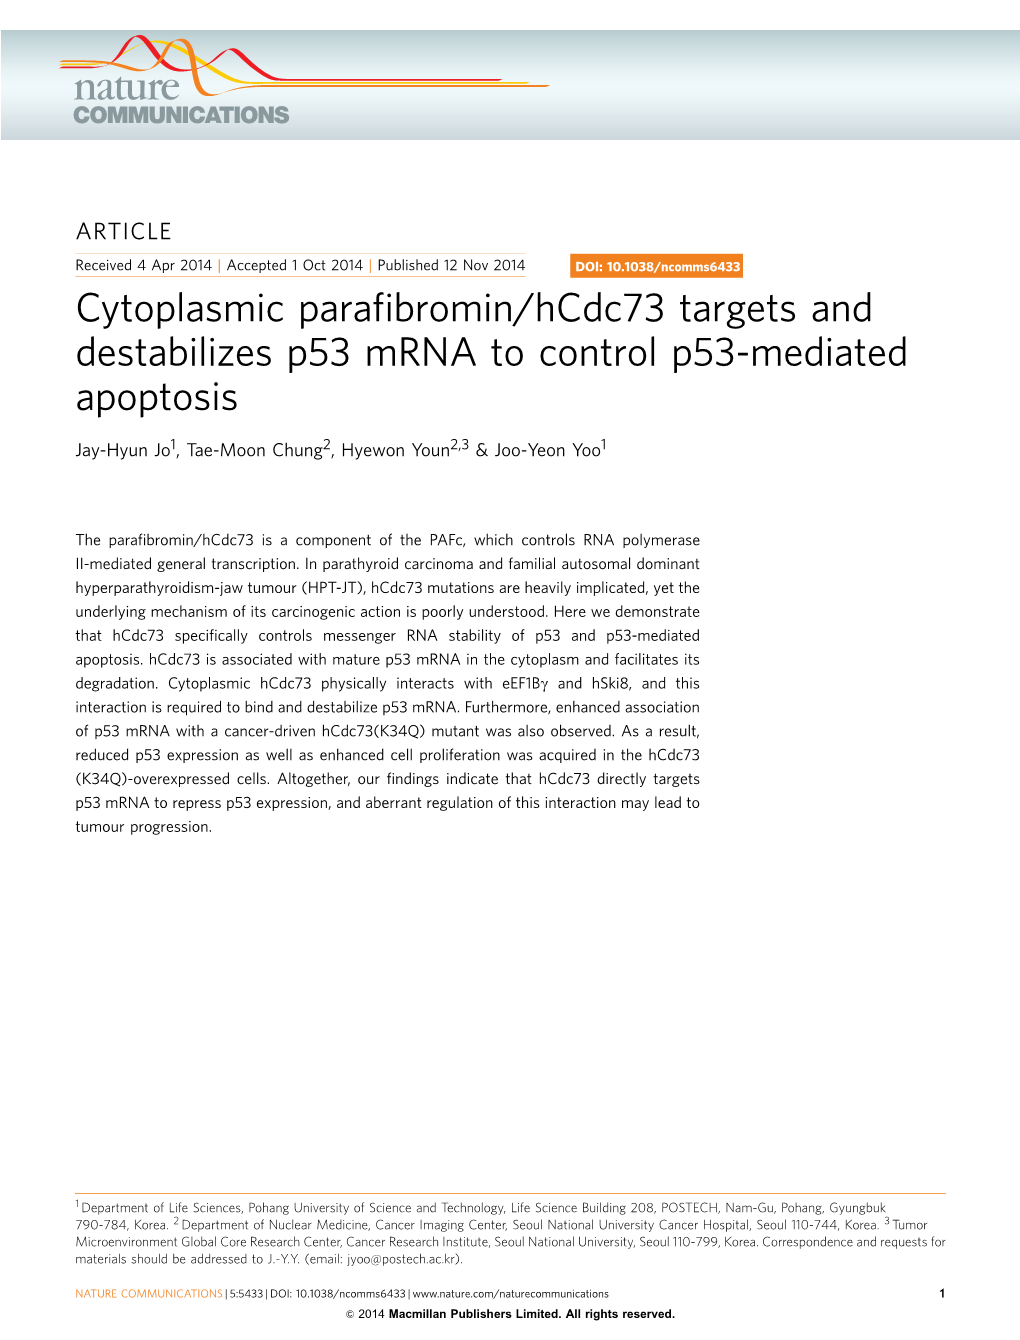 Cytoplasmic Parafibromin/Hcdc73 Targets and Destabilizes P53 Mrna